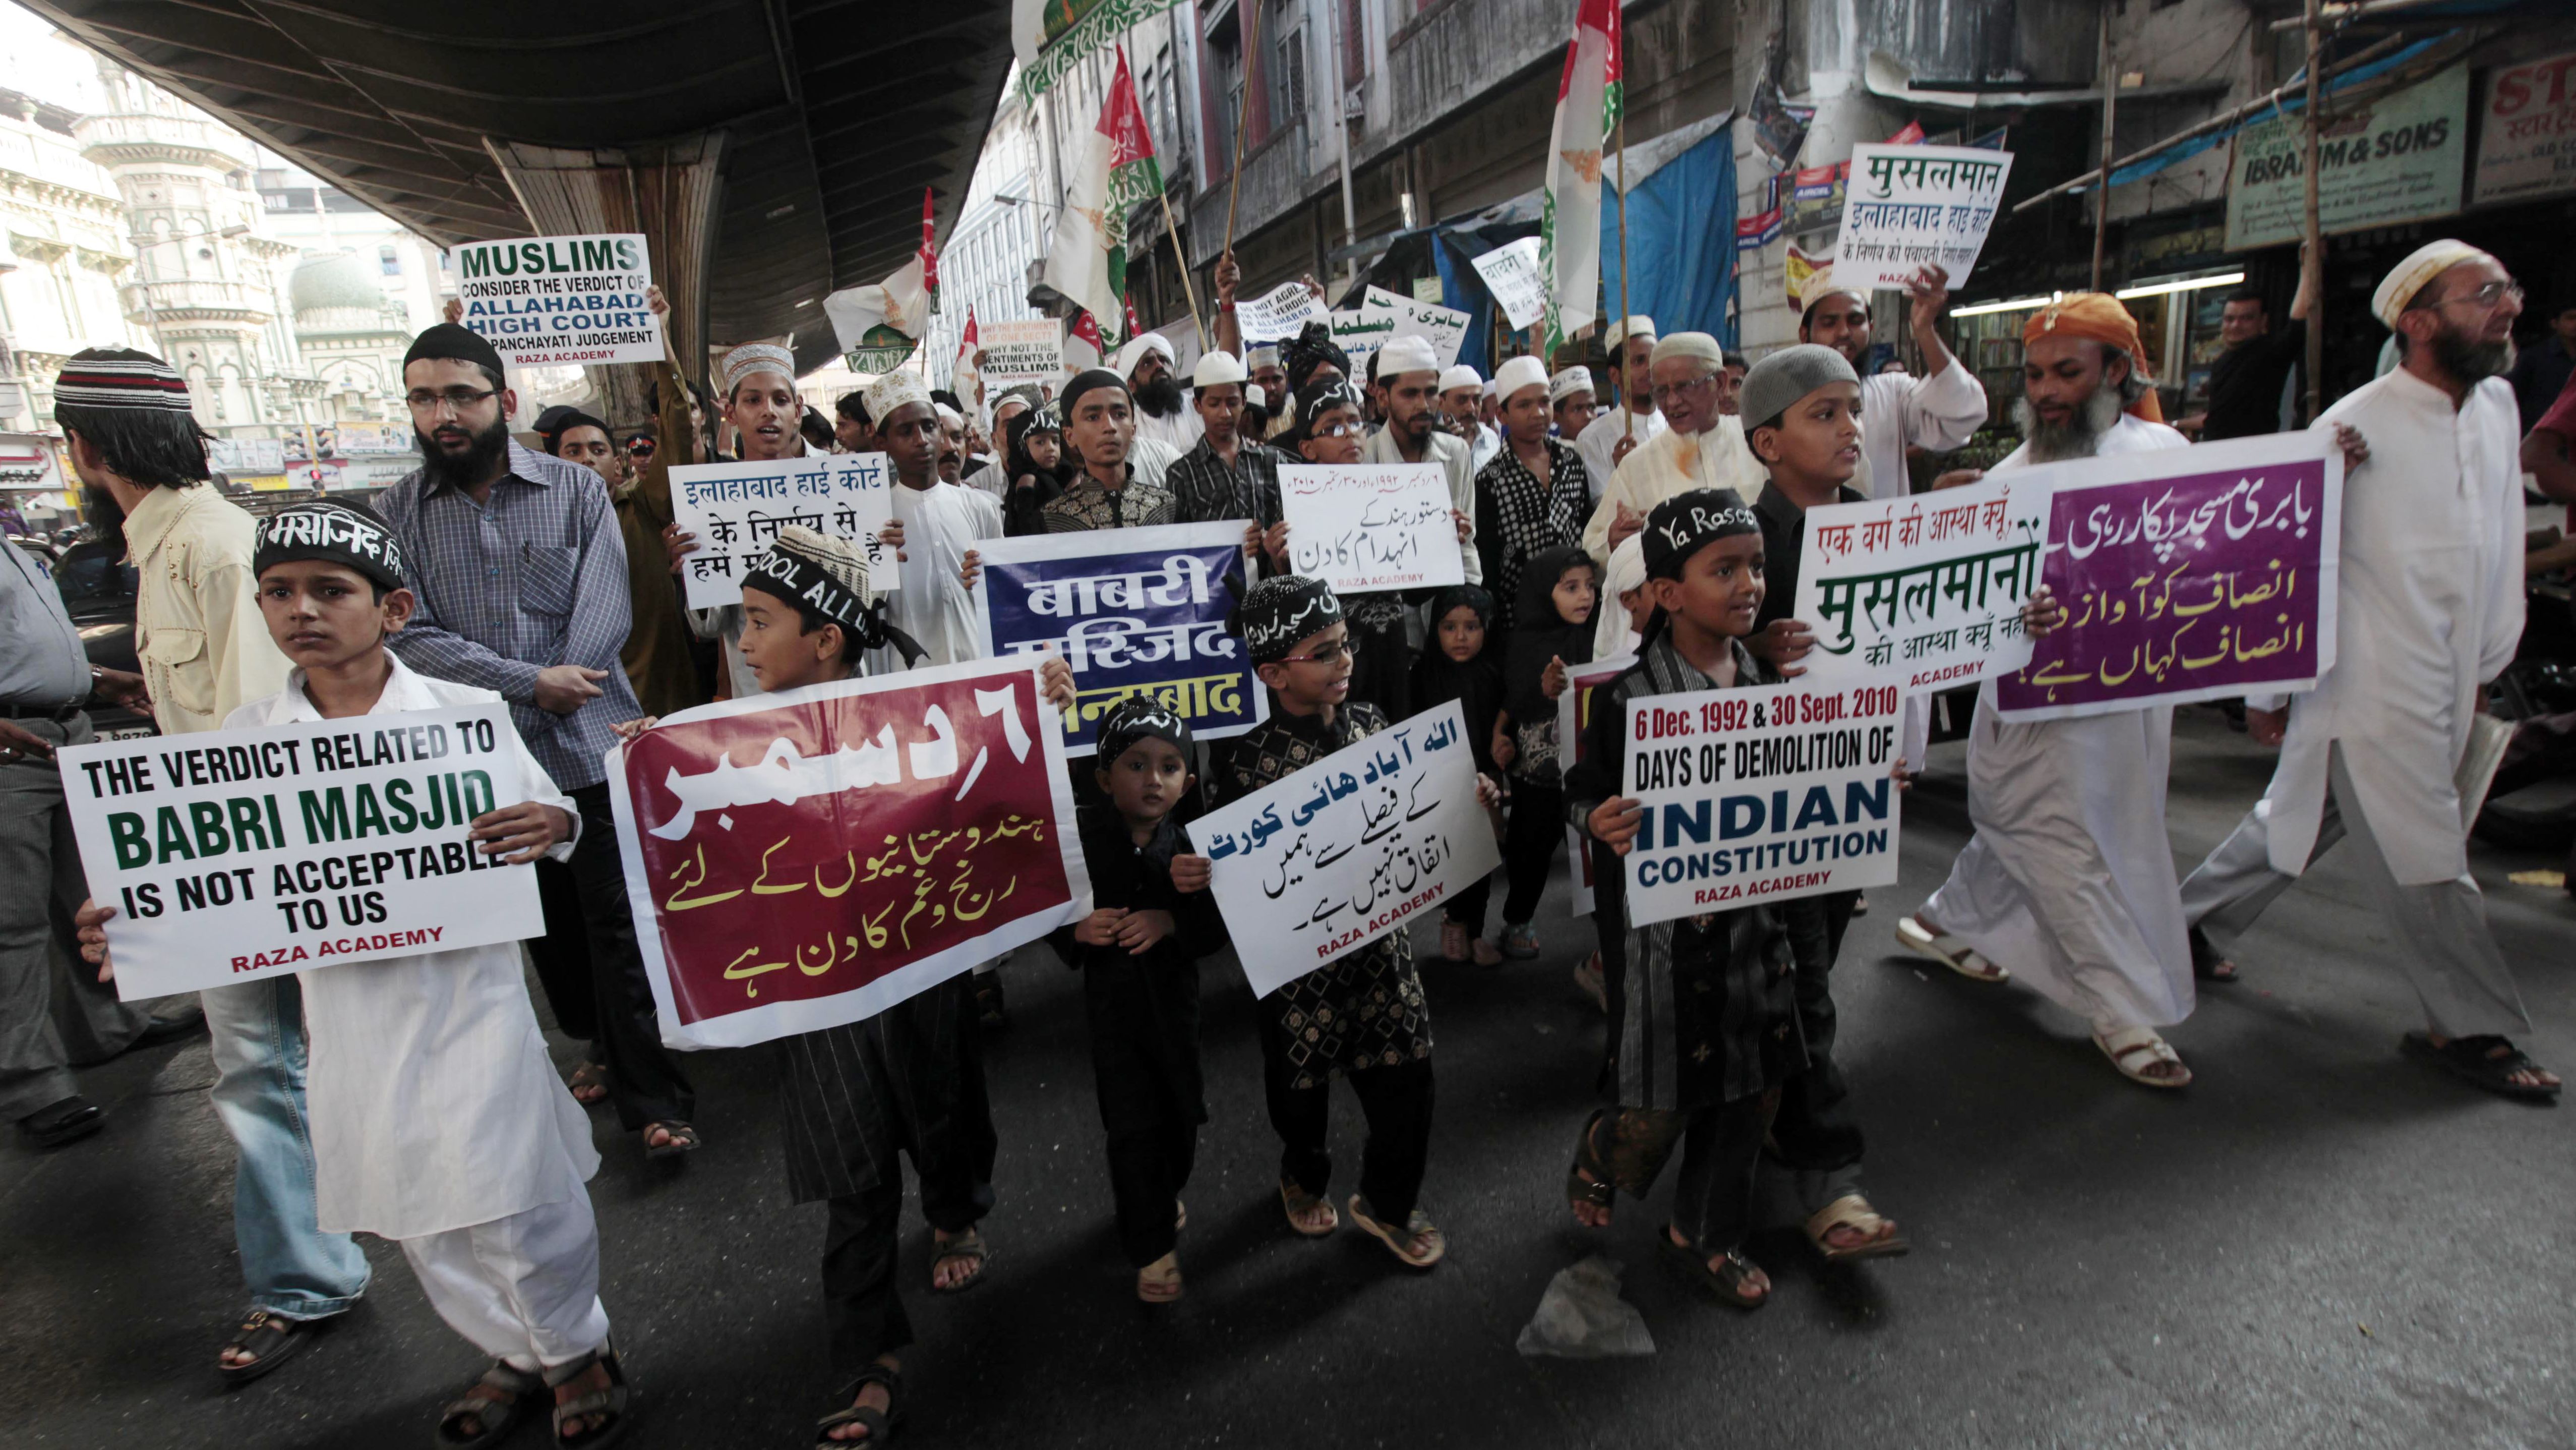 Muslim children in Mumbai  hold placards as they march with activists in December 2010 to mark the  anniversary of the demolition of the Babri Masjid.